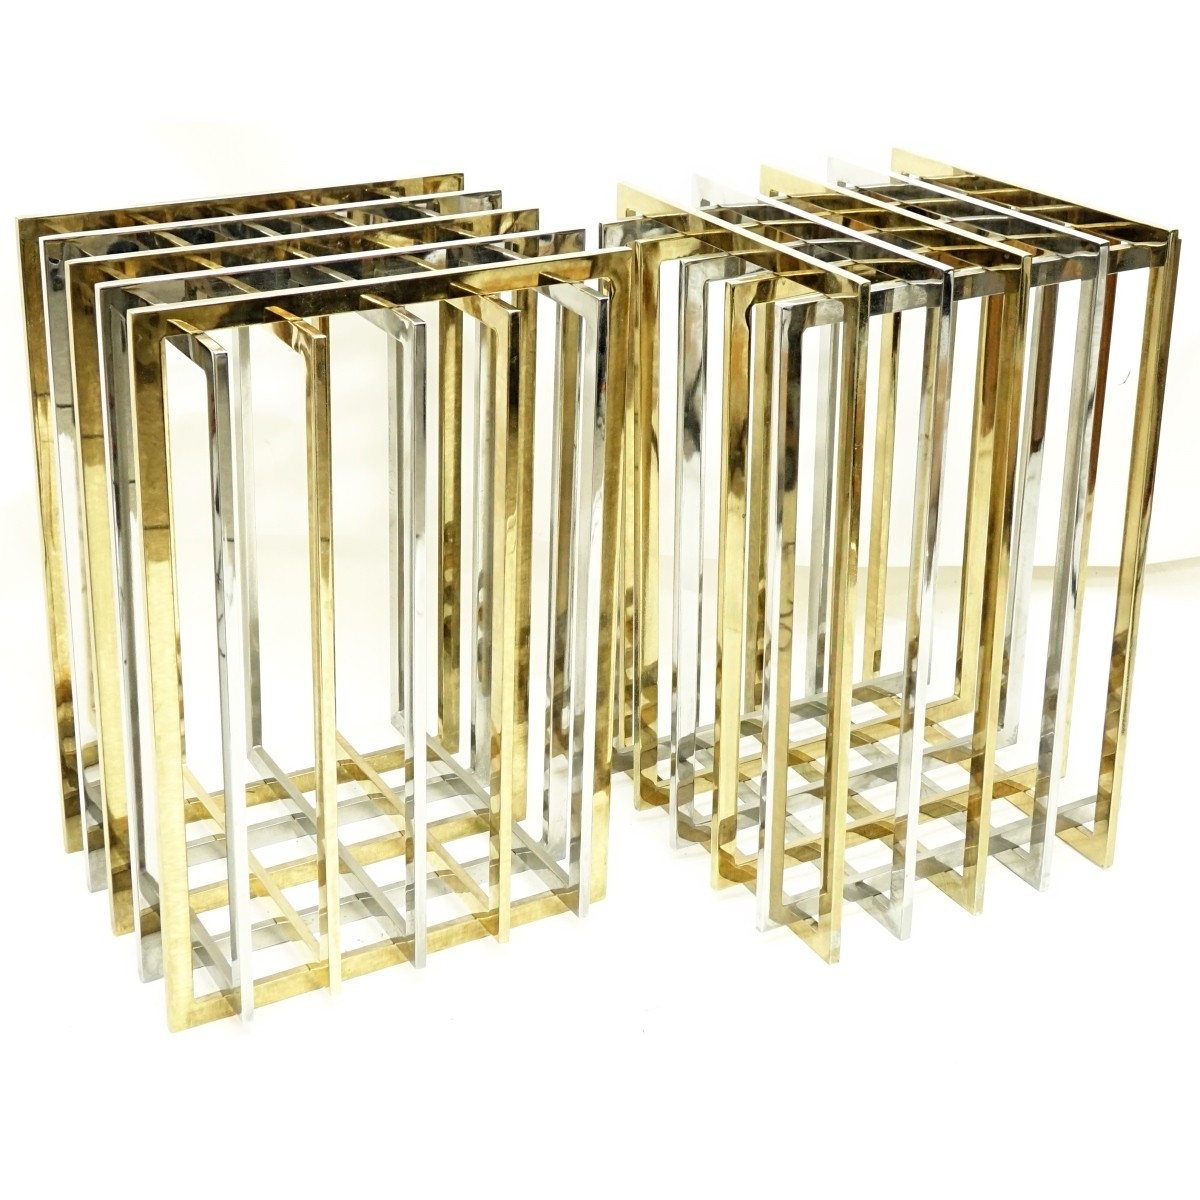 Pierre Cardin (born 1922) Chrome and Brass Bases